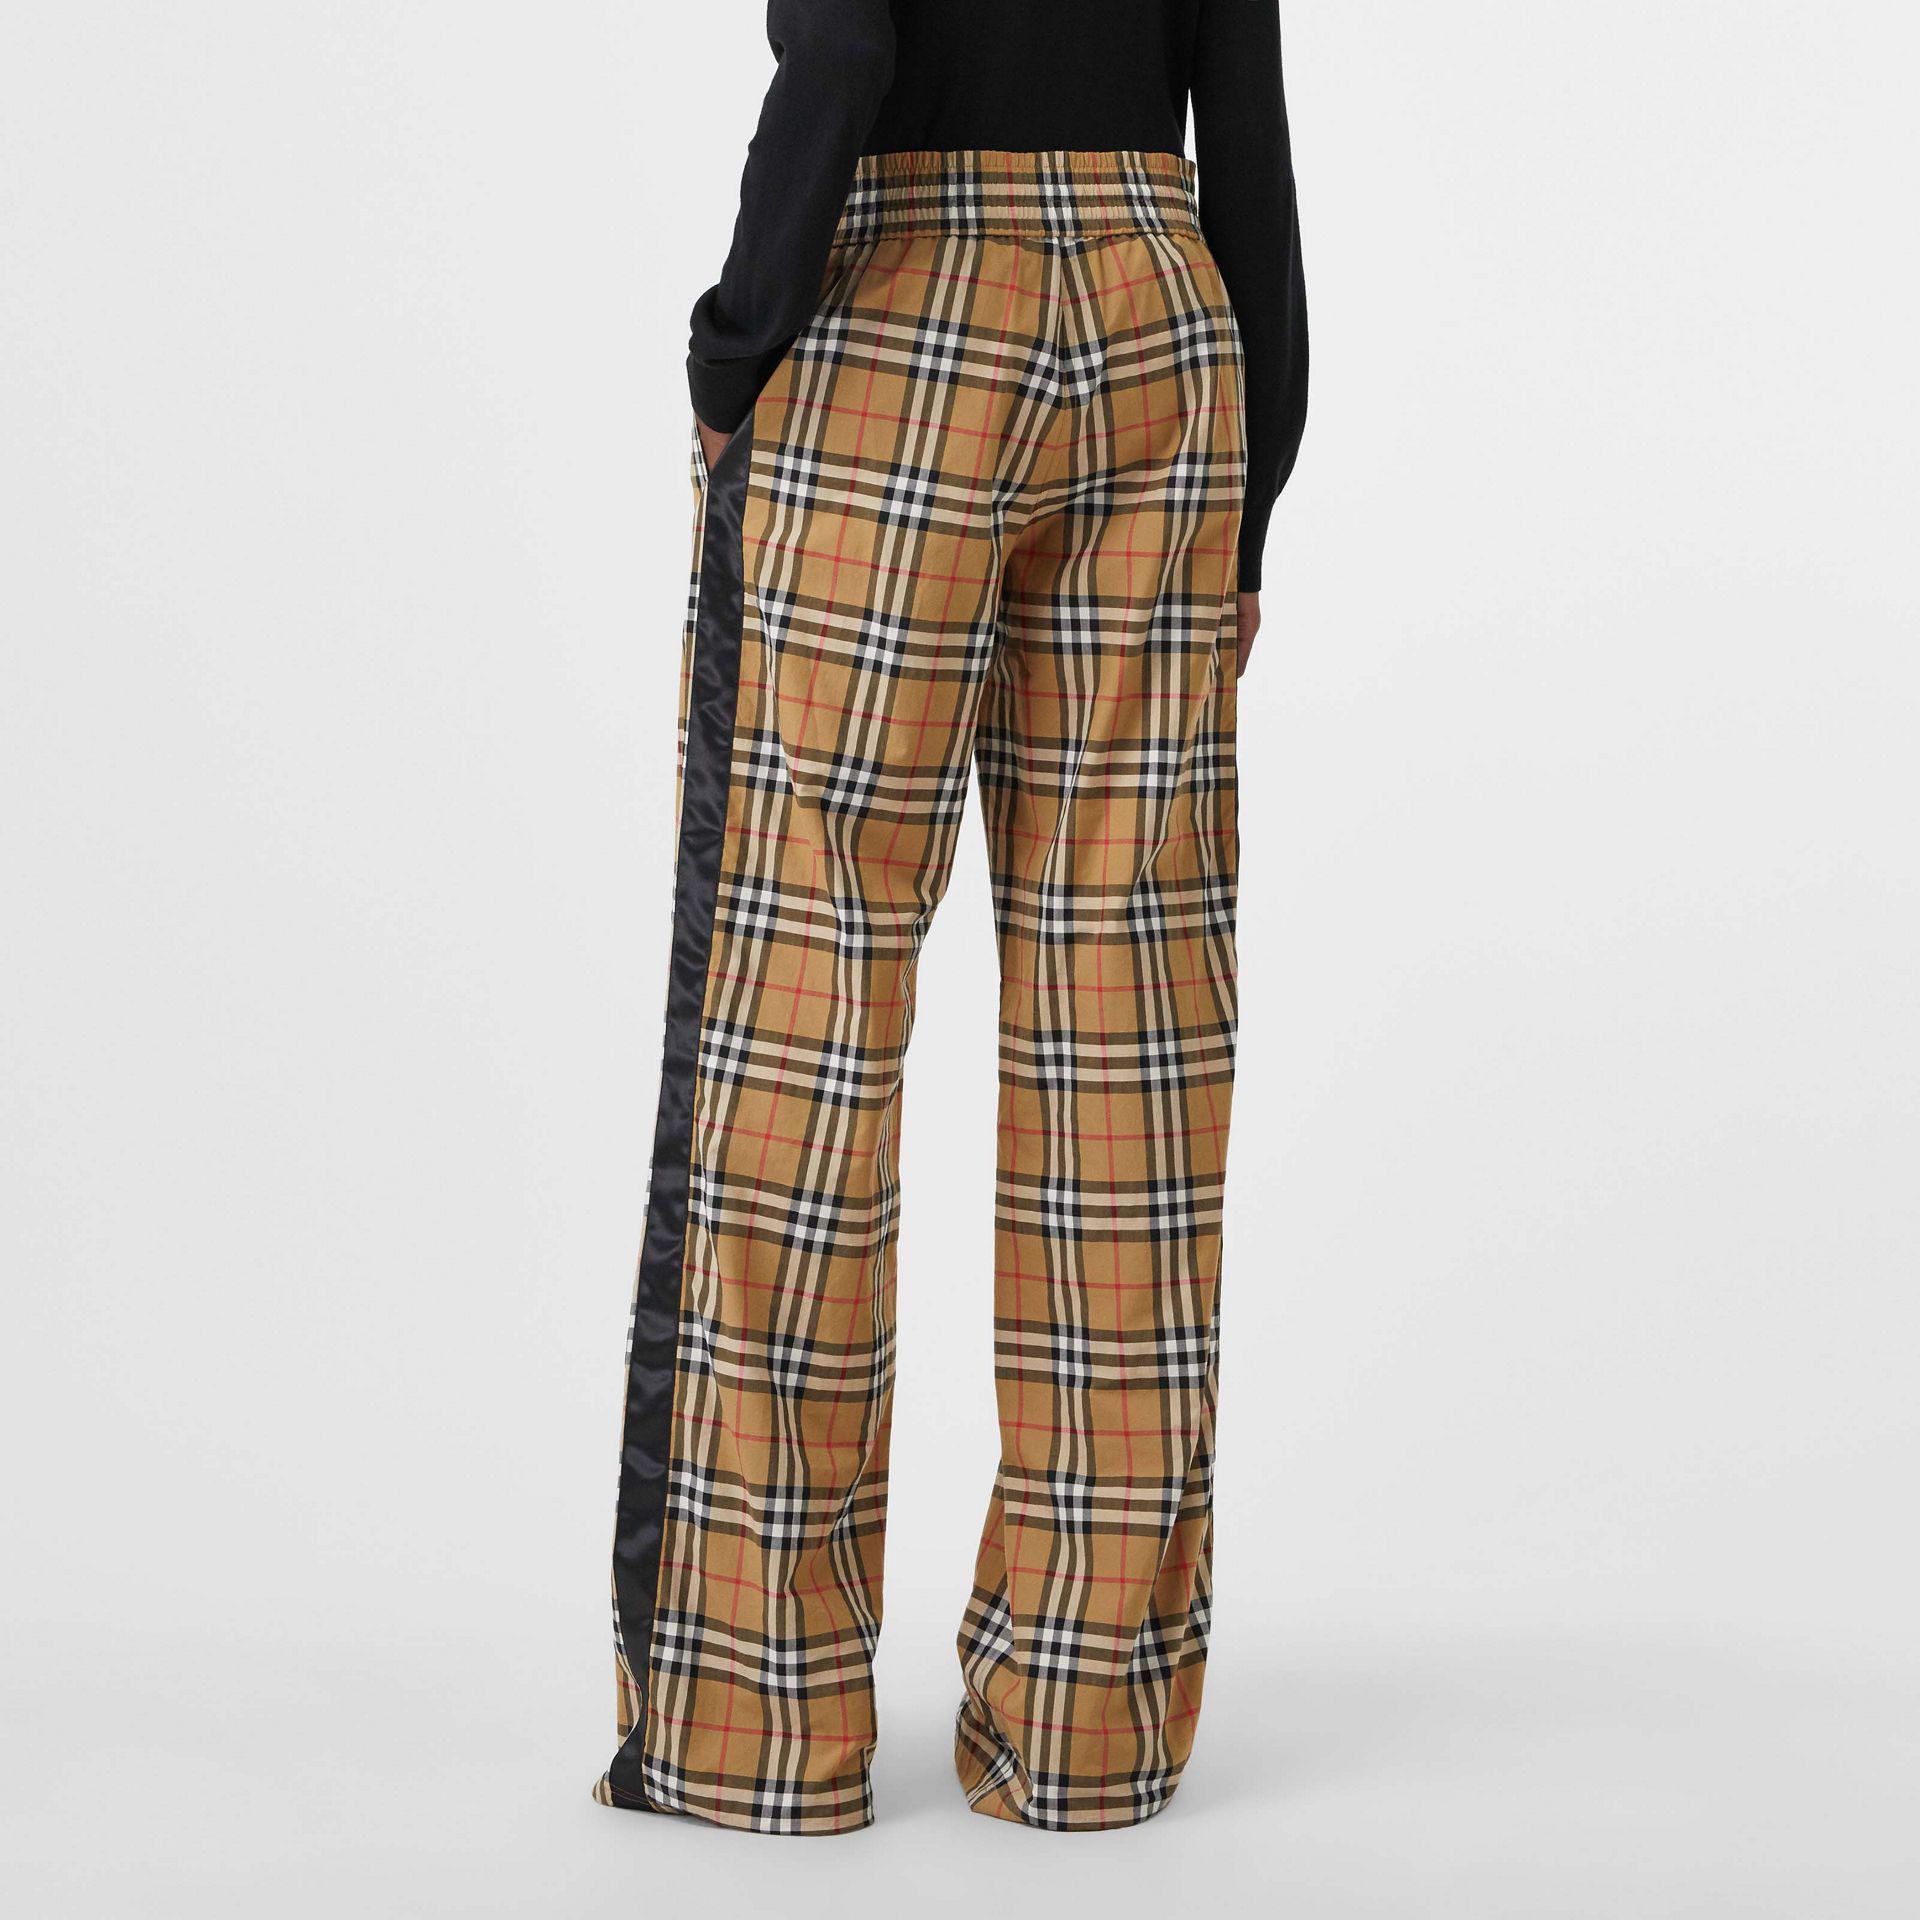 burberry checkered trousers